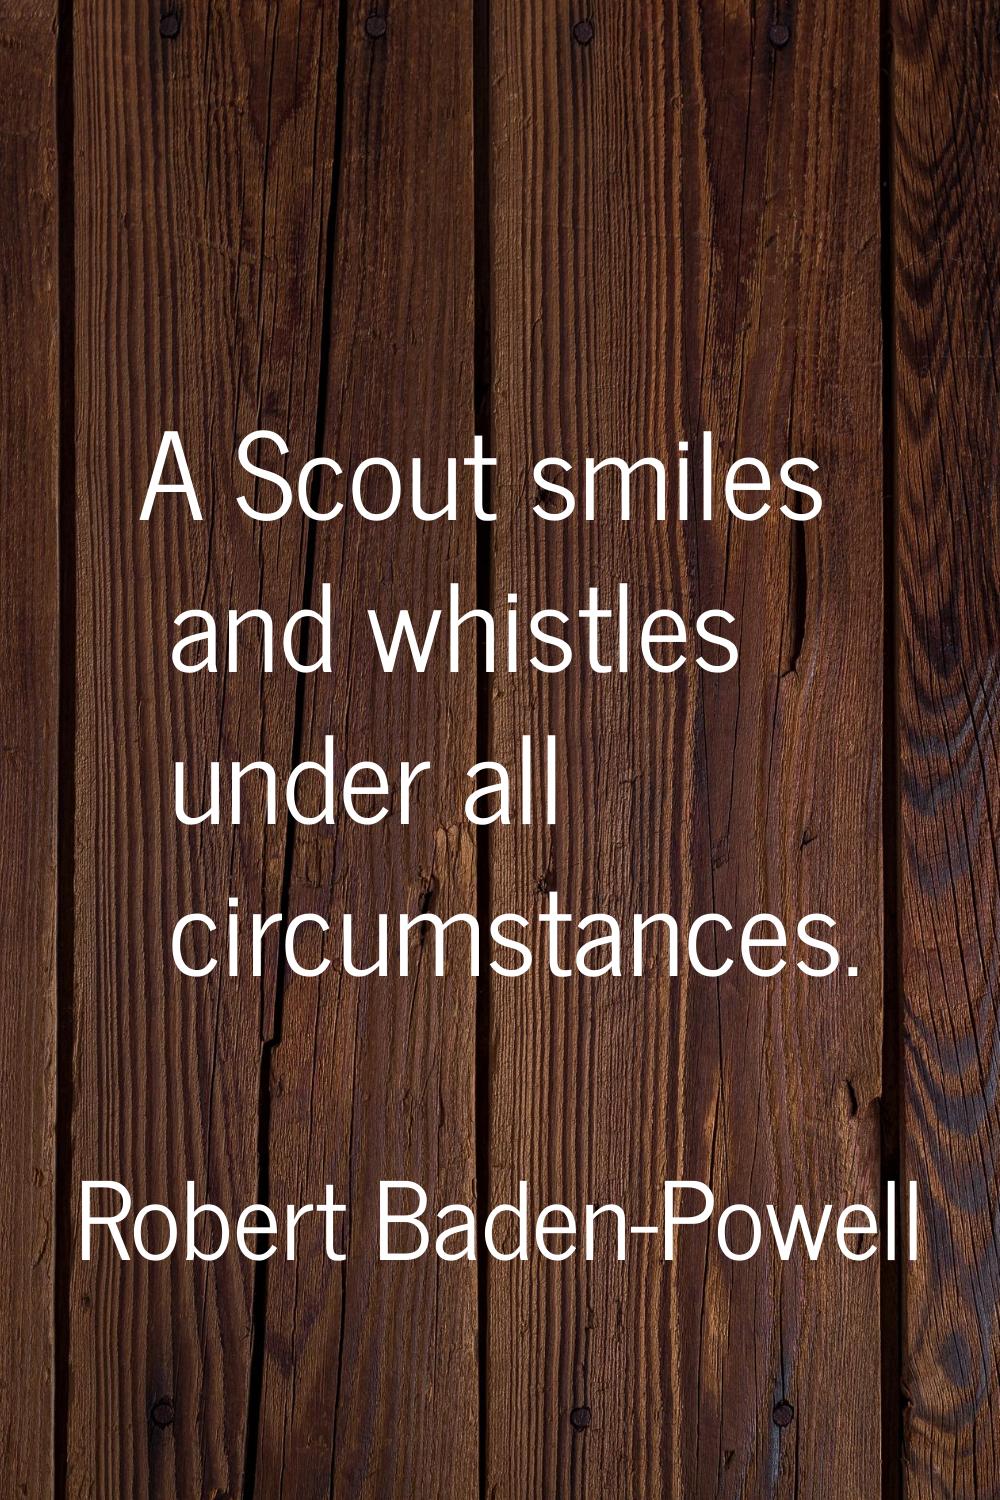 A Scout smiles and whistles under all circumstances.